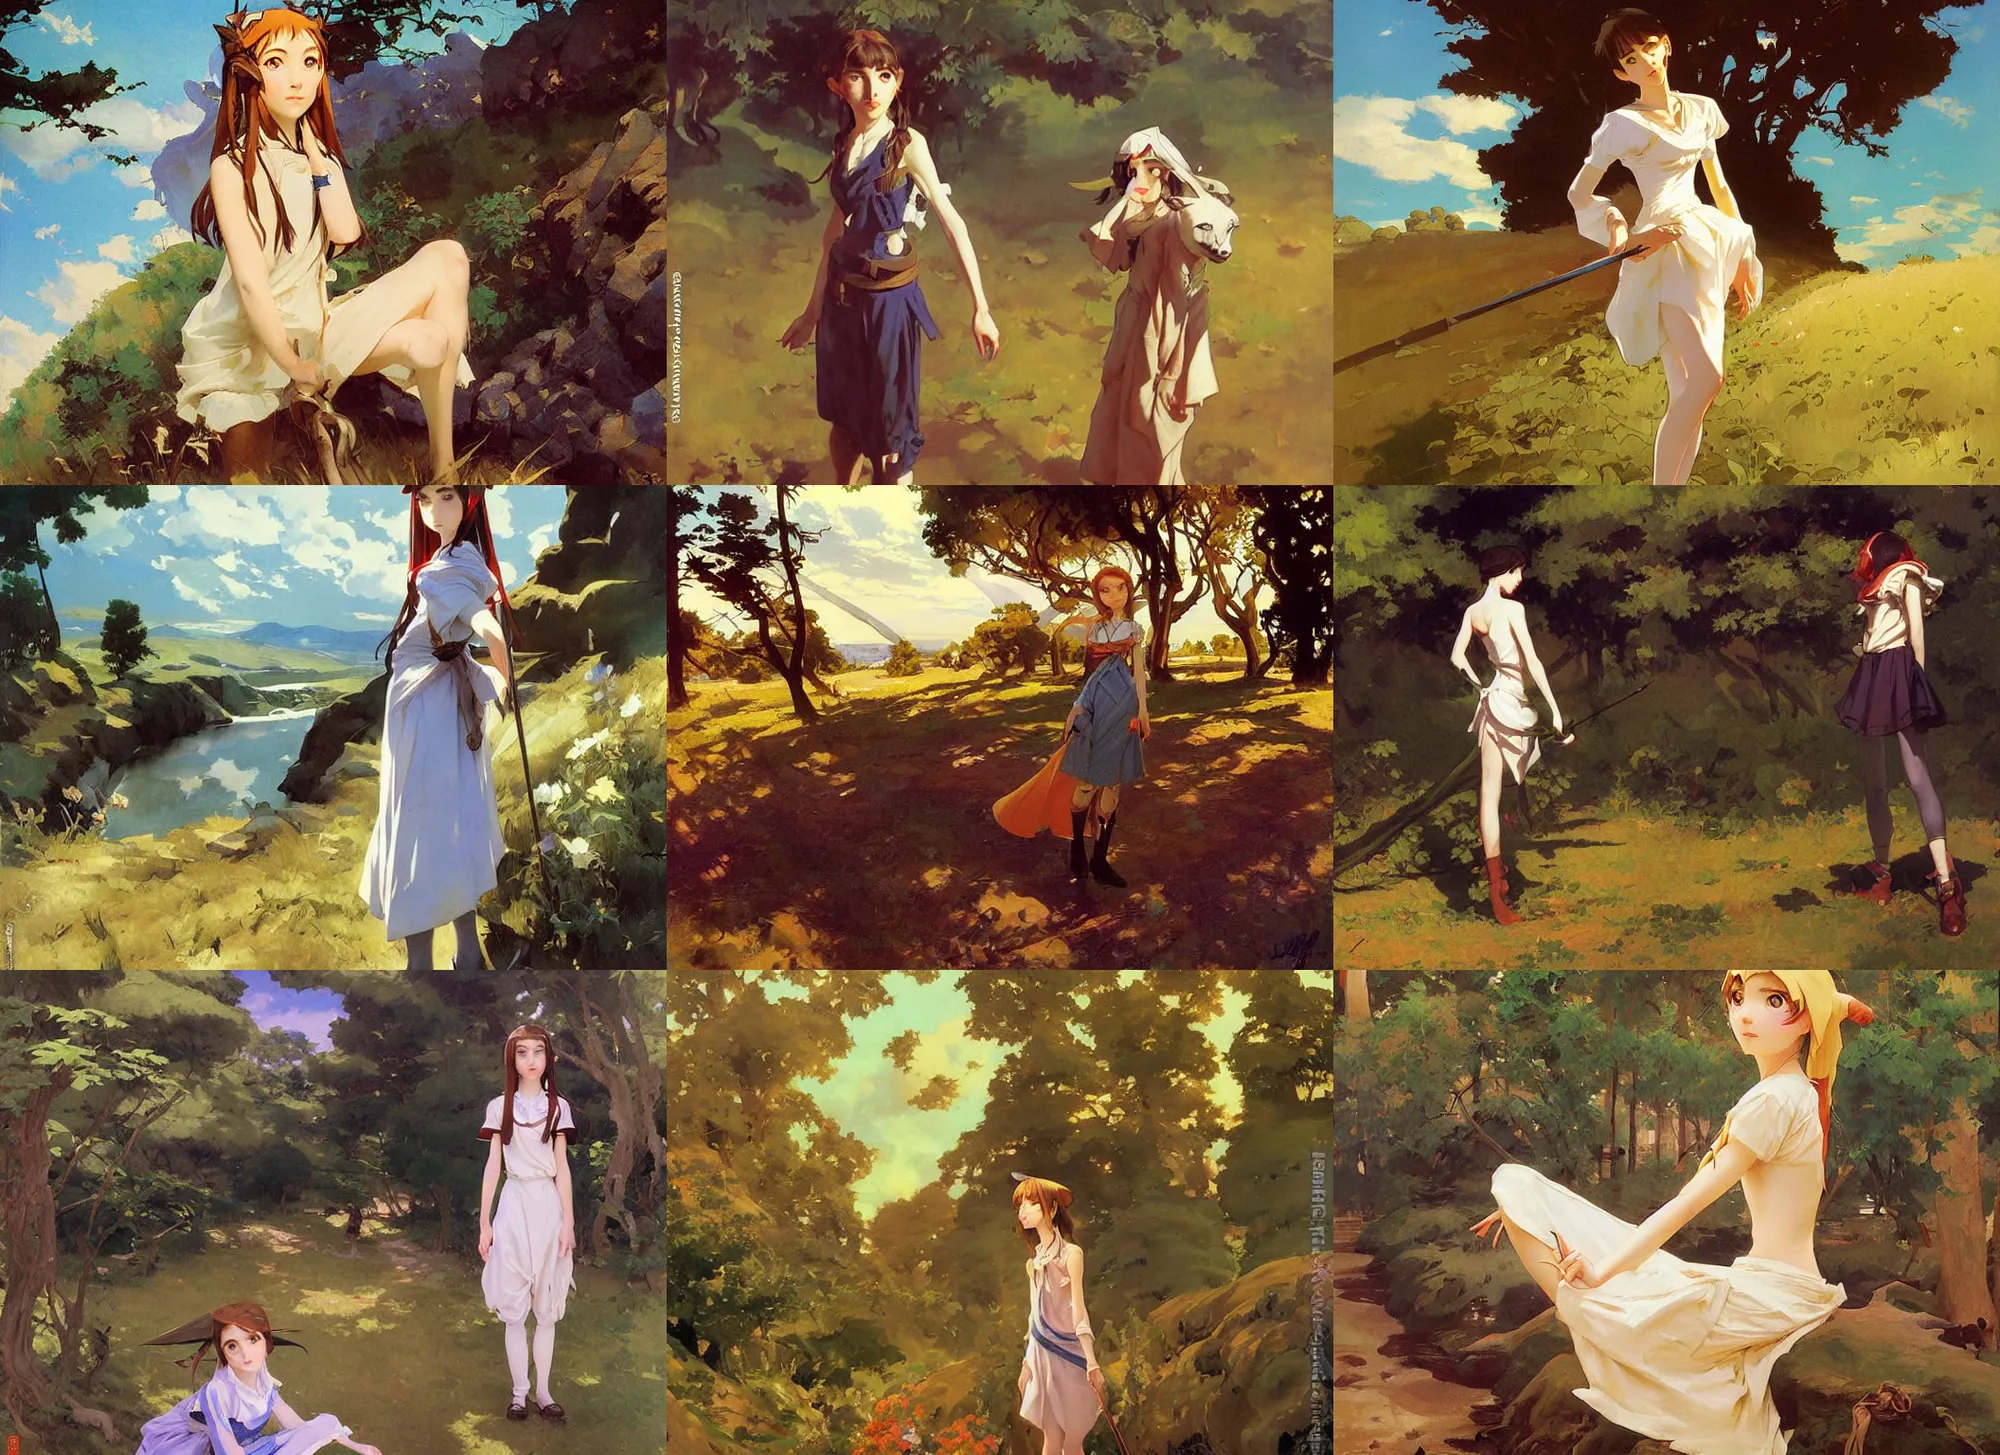 Prompt: painting by sargent and leyendecker and greg hildebrandt savrasov levitan polenov, studio ghibly anime style young skinny girl mononoke, middle earth landscape, masterpiece